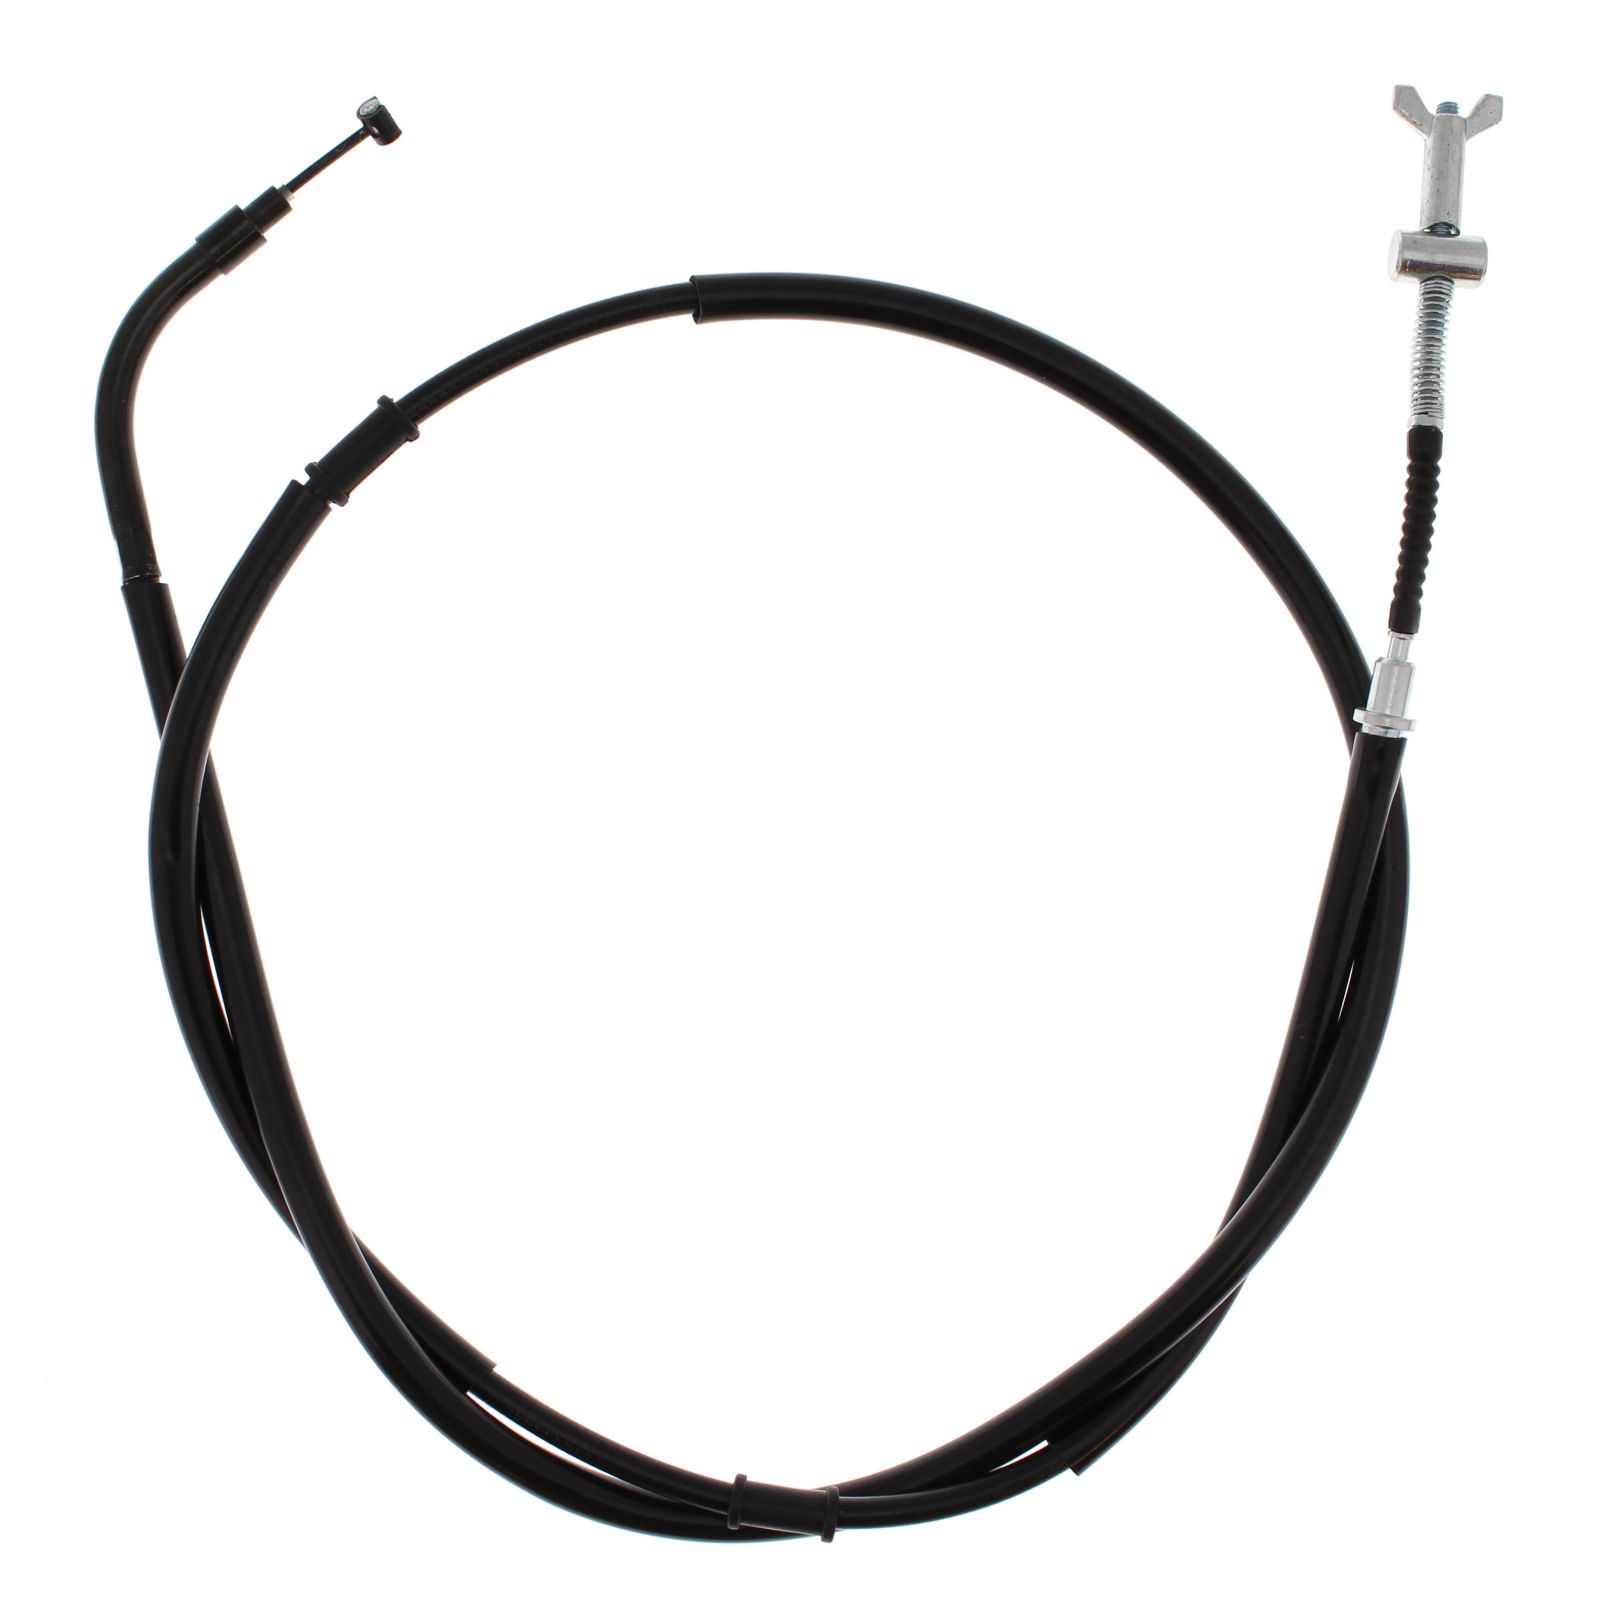 Wrp Brake Cables - WRP454044 image